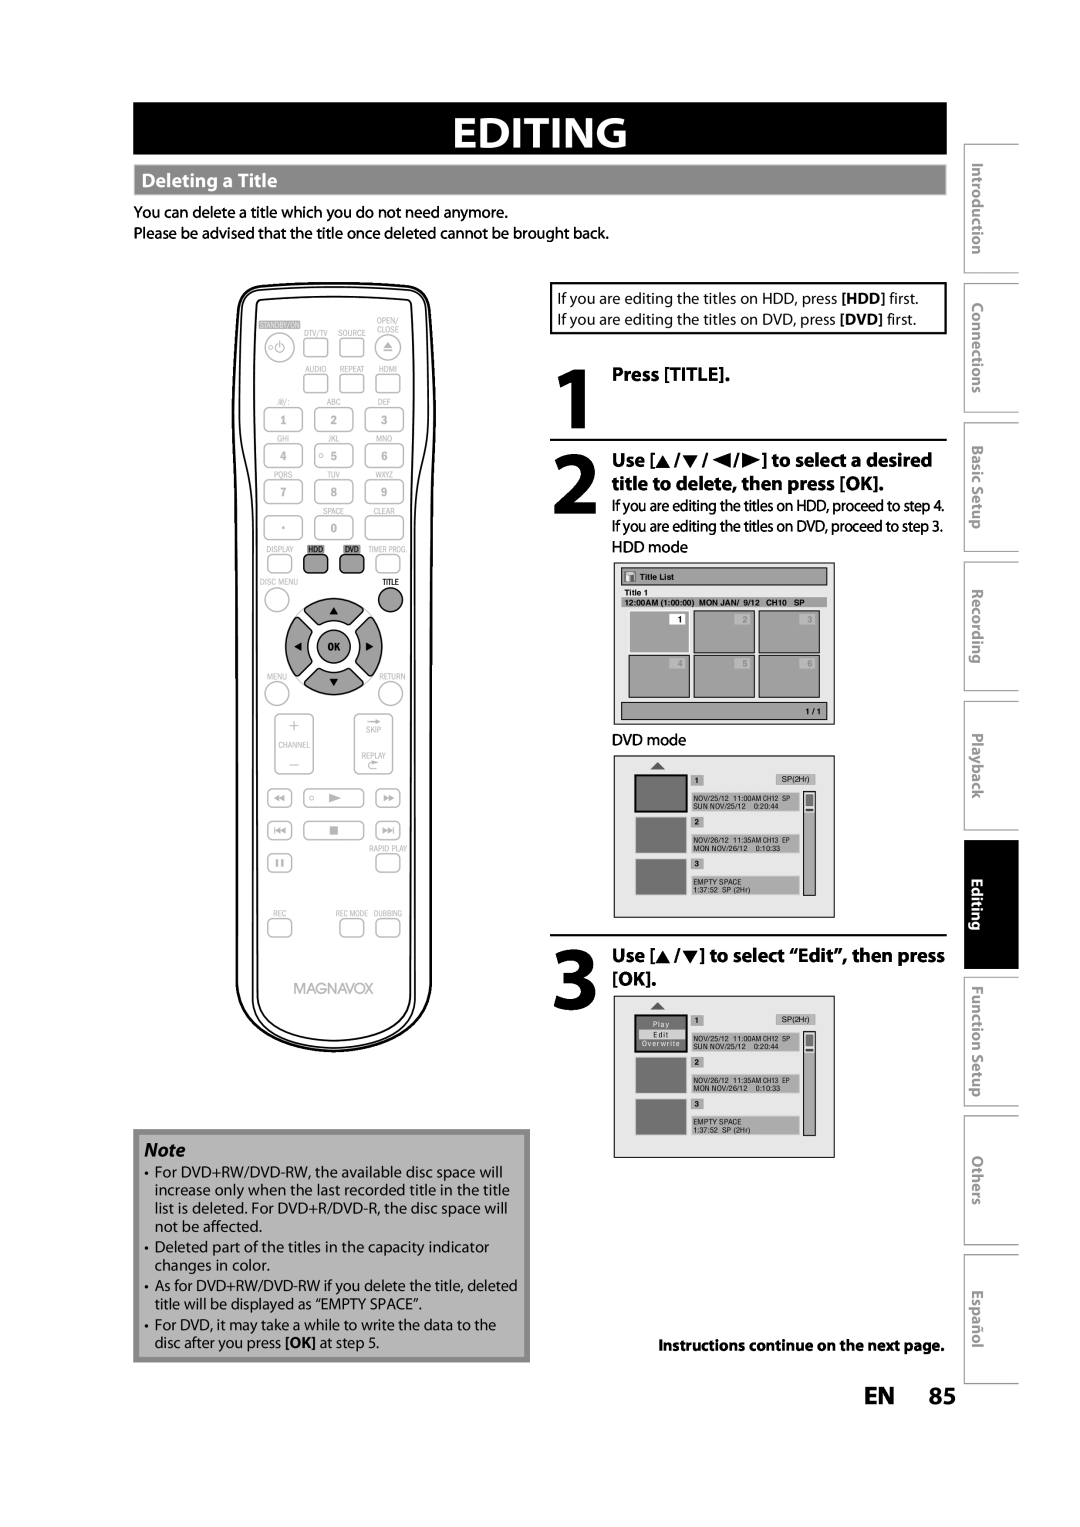 Magnavox MDR533H owner manual Editing, Deleting a Title, Press TITLE Use K / L / / B to select a desired, HDD mode, Español 